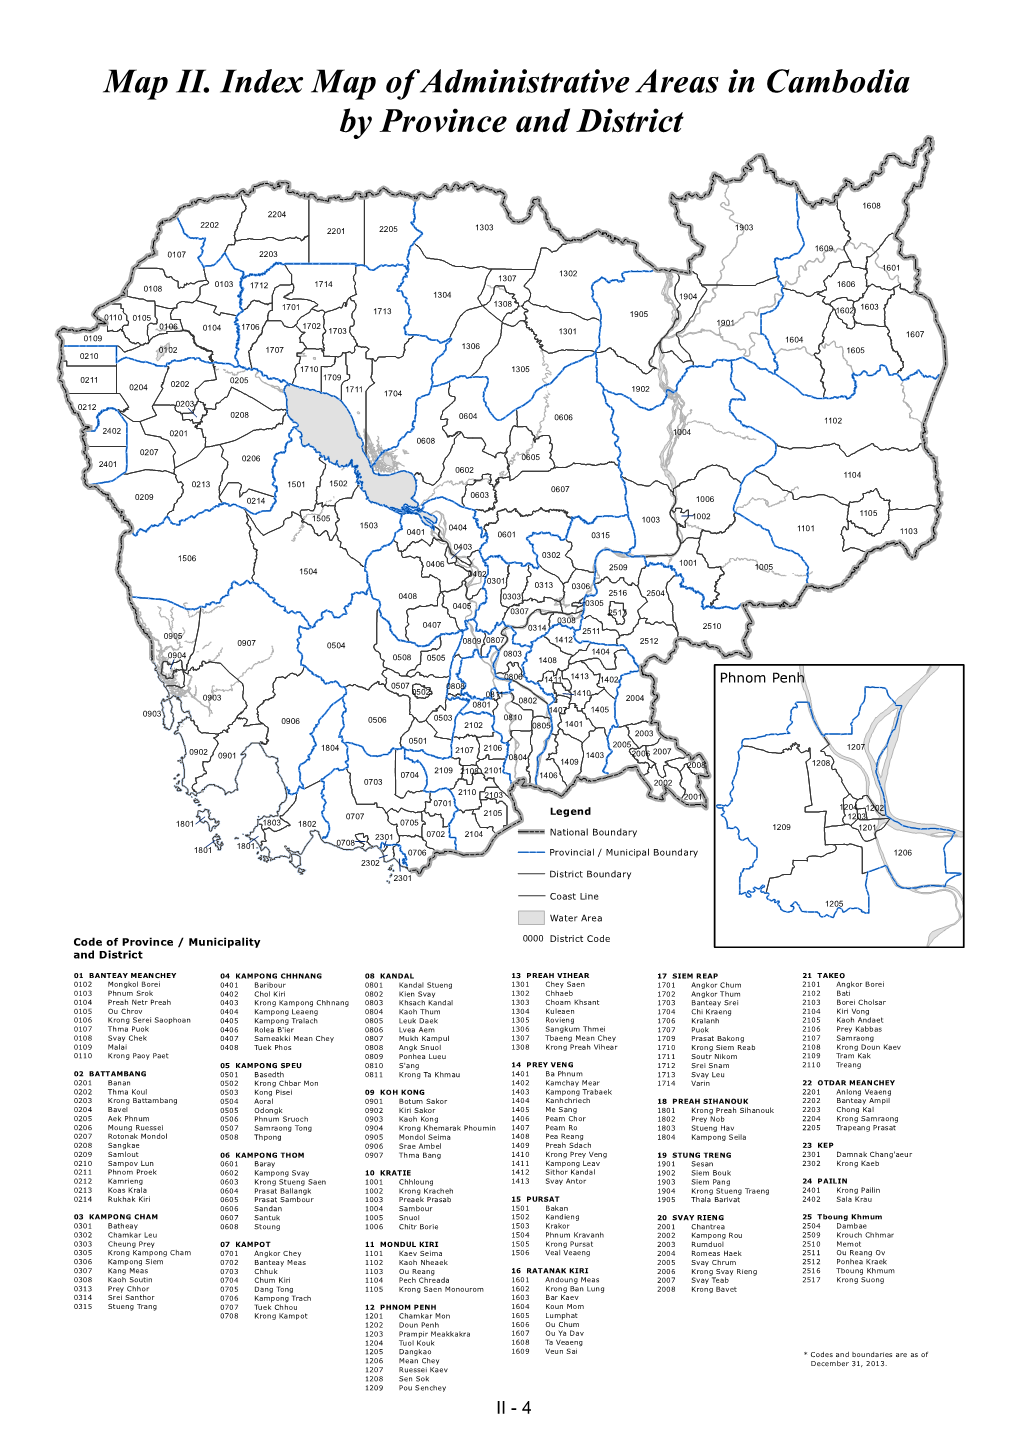 Map II. Index Map of Administrative Areas in Cambodia by Province and District